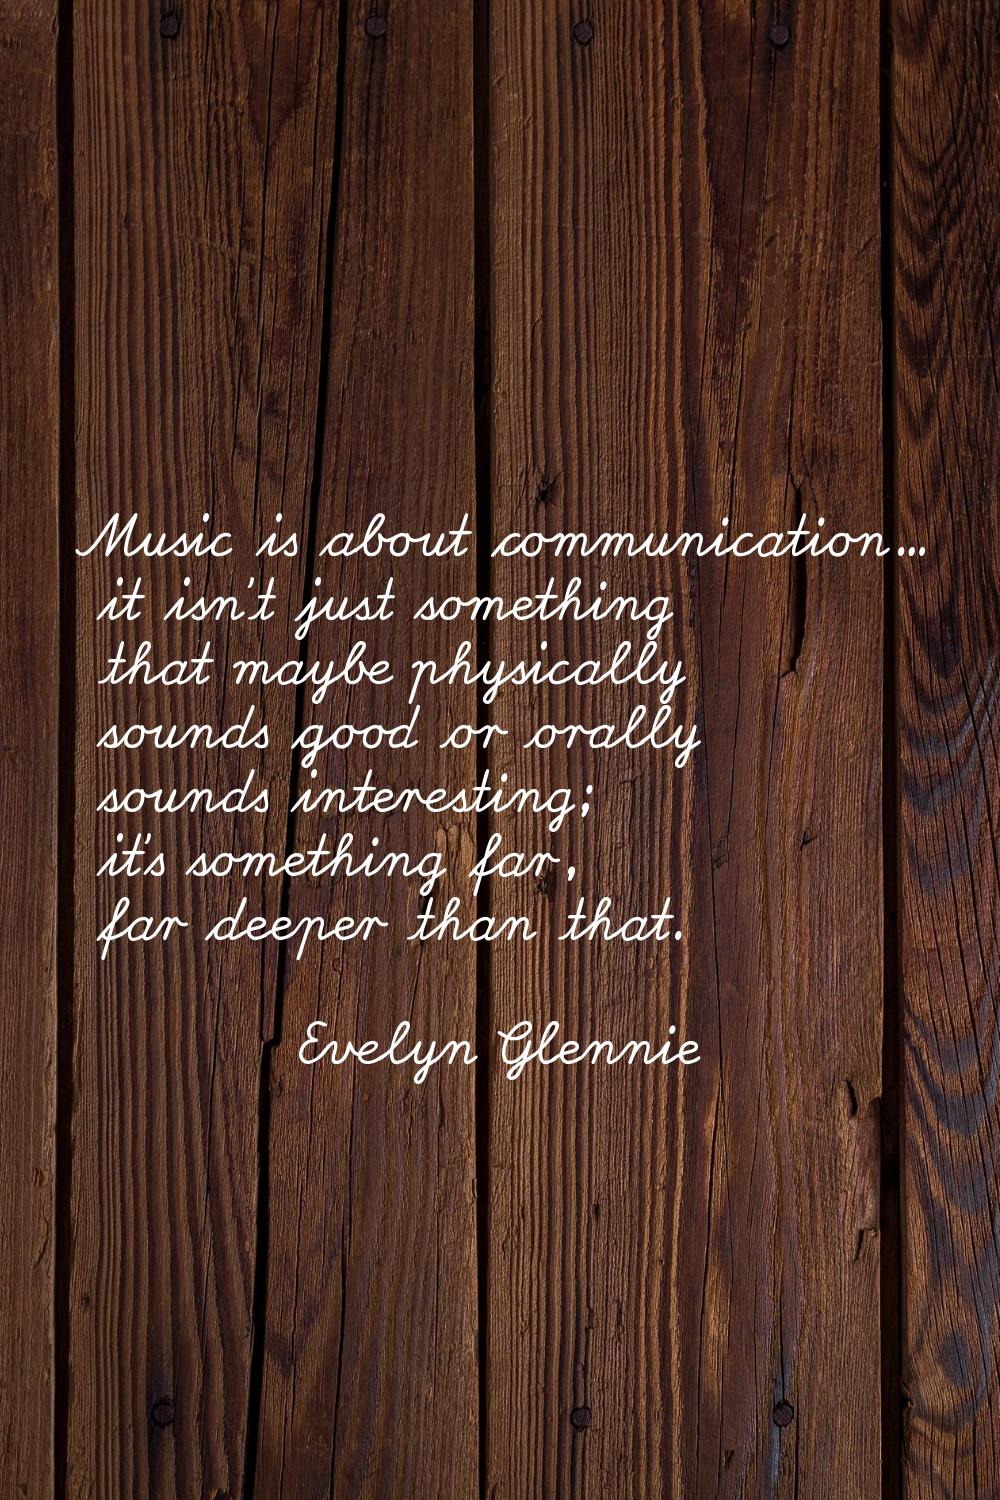 Music is about communication... it isn't just something that maybe physically sounds good or orally